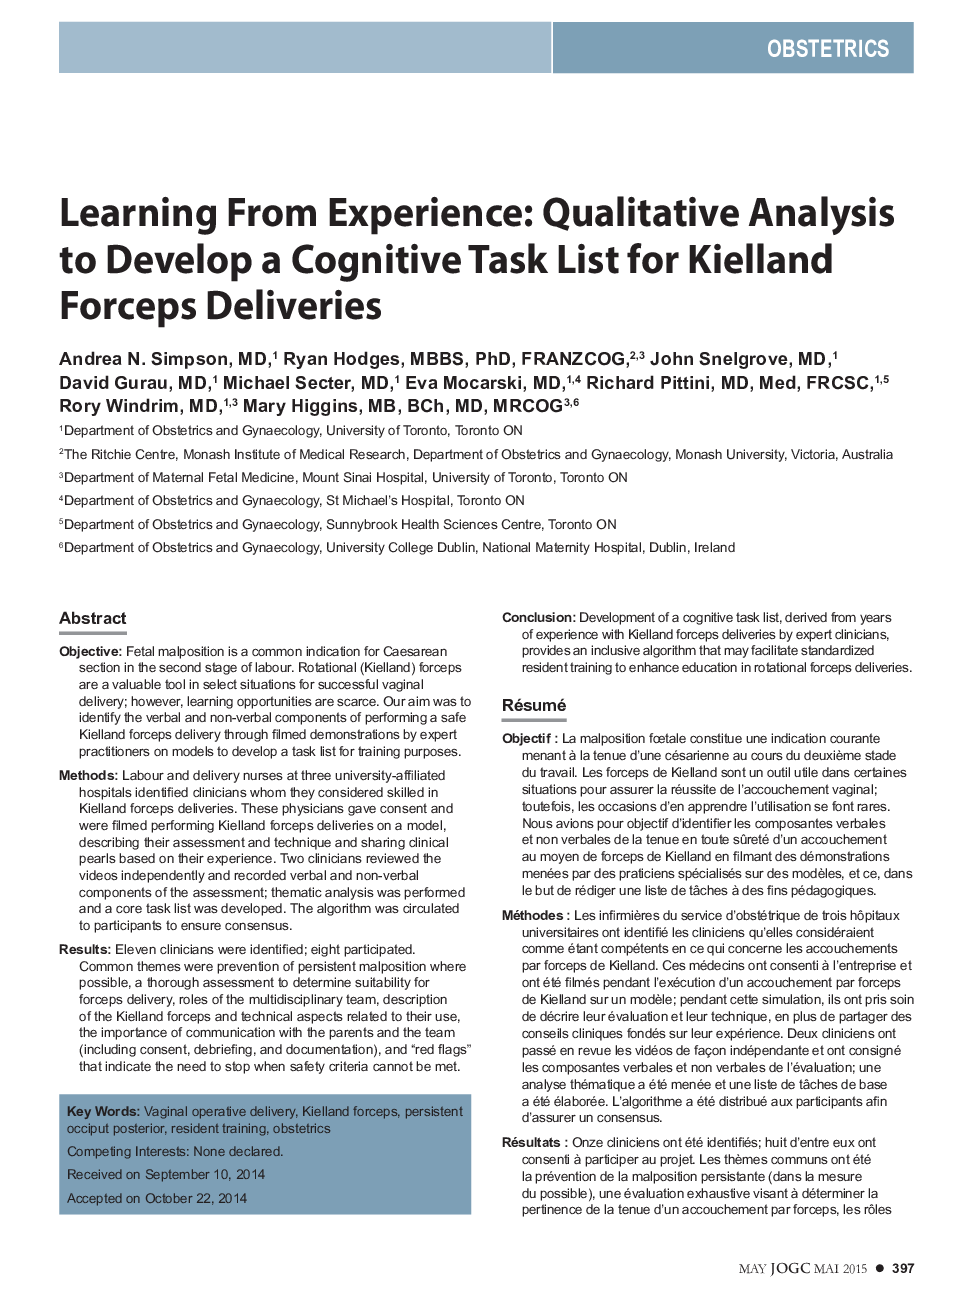 Learning From Experience: Qualitative Analysis to Develop a Cognitive Task List for Kielland Forceps Deliveries